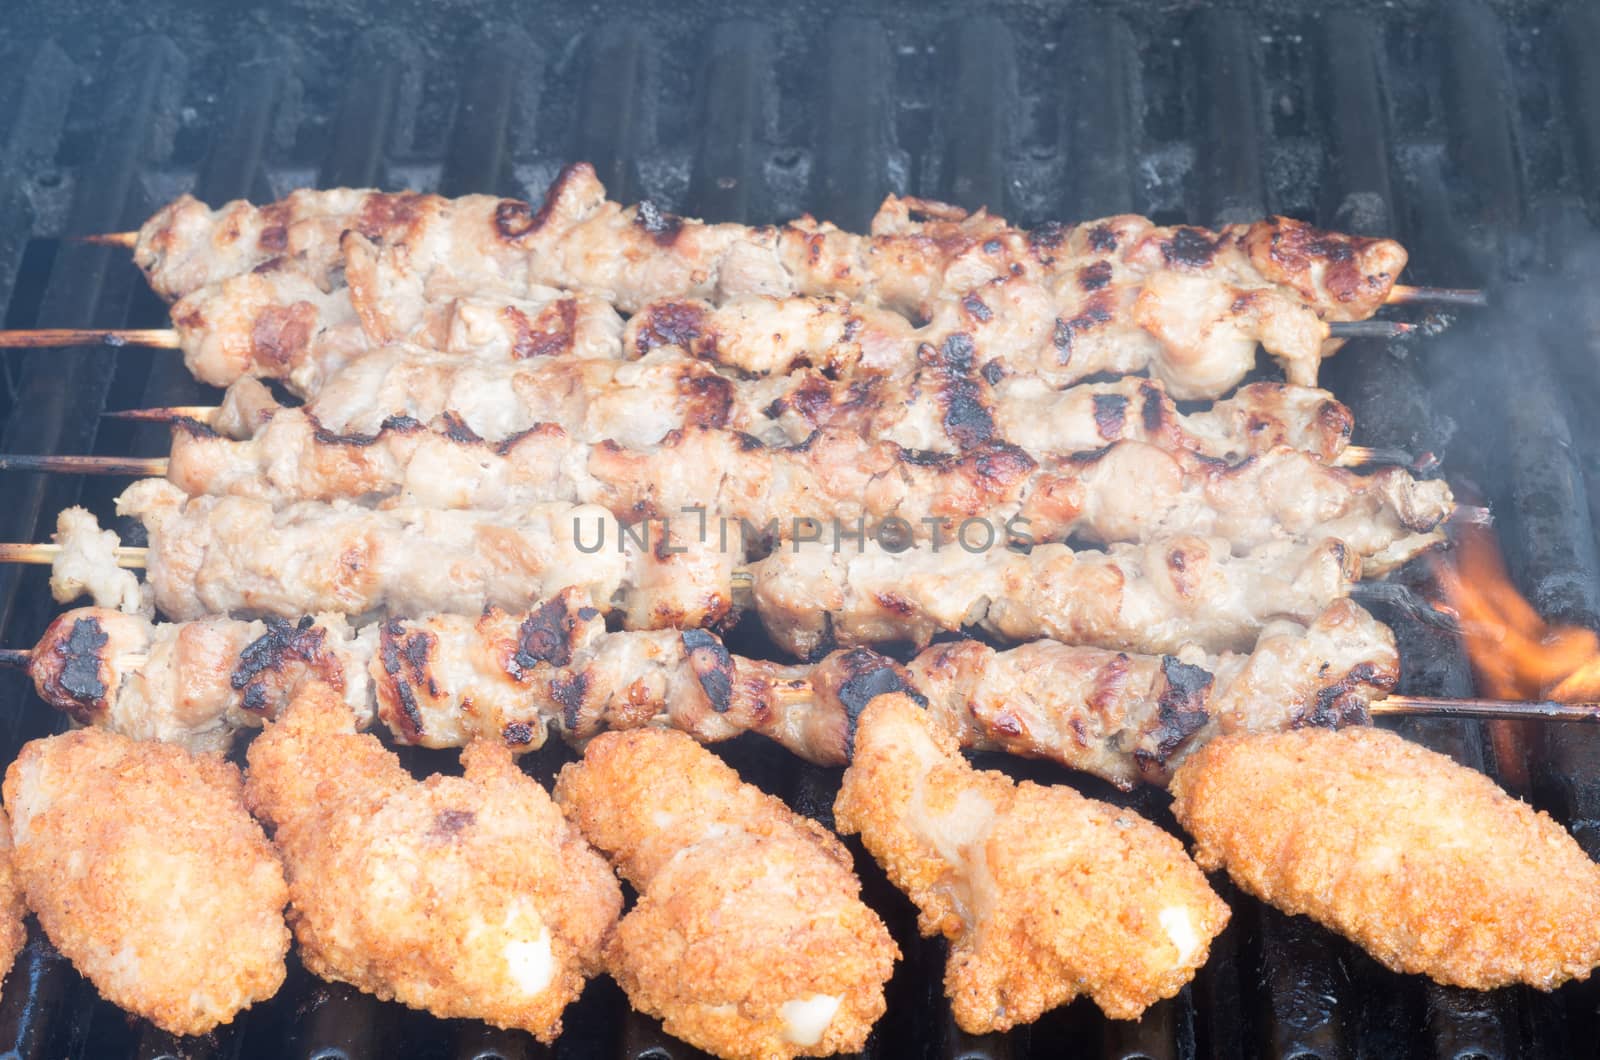 Porc skewers and chicken wings on grill by daoleduc